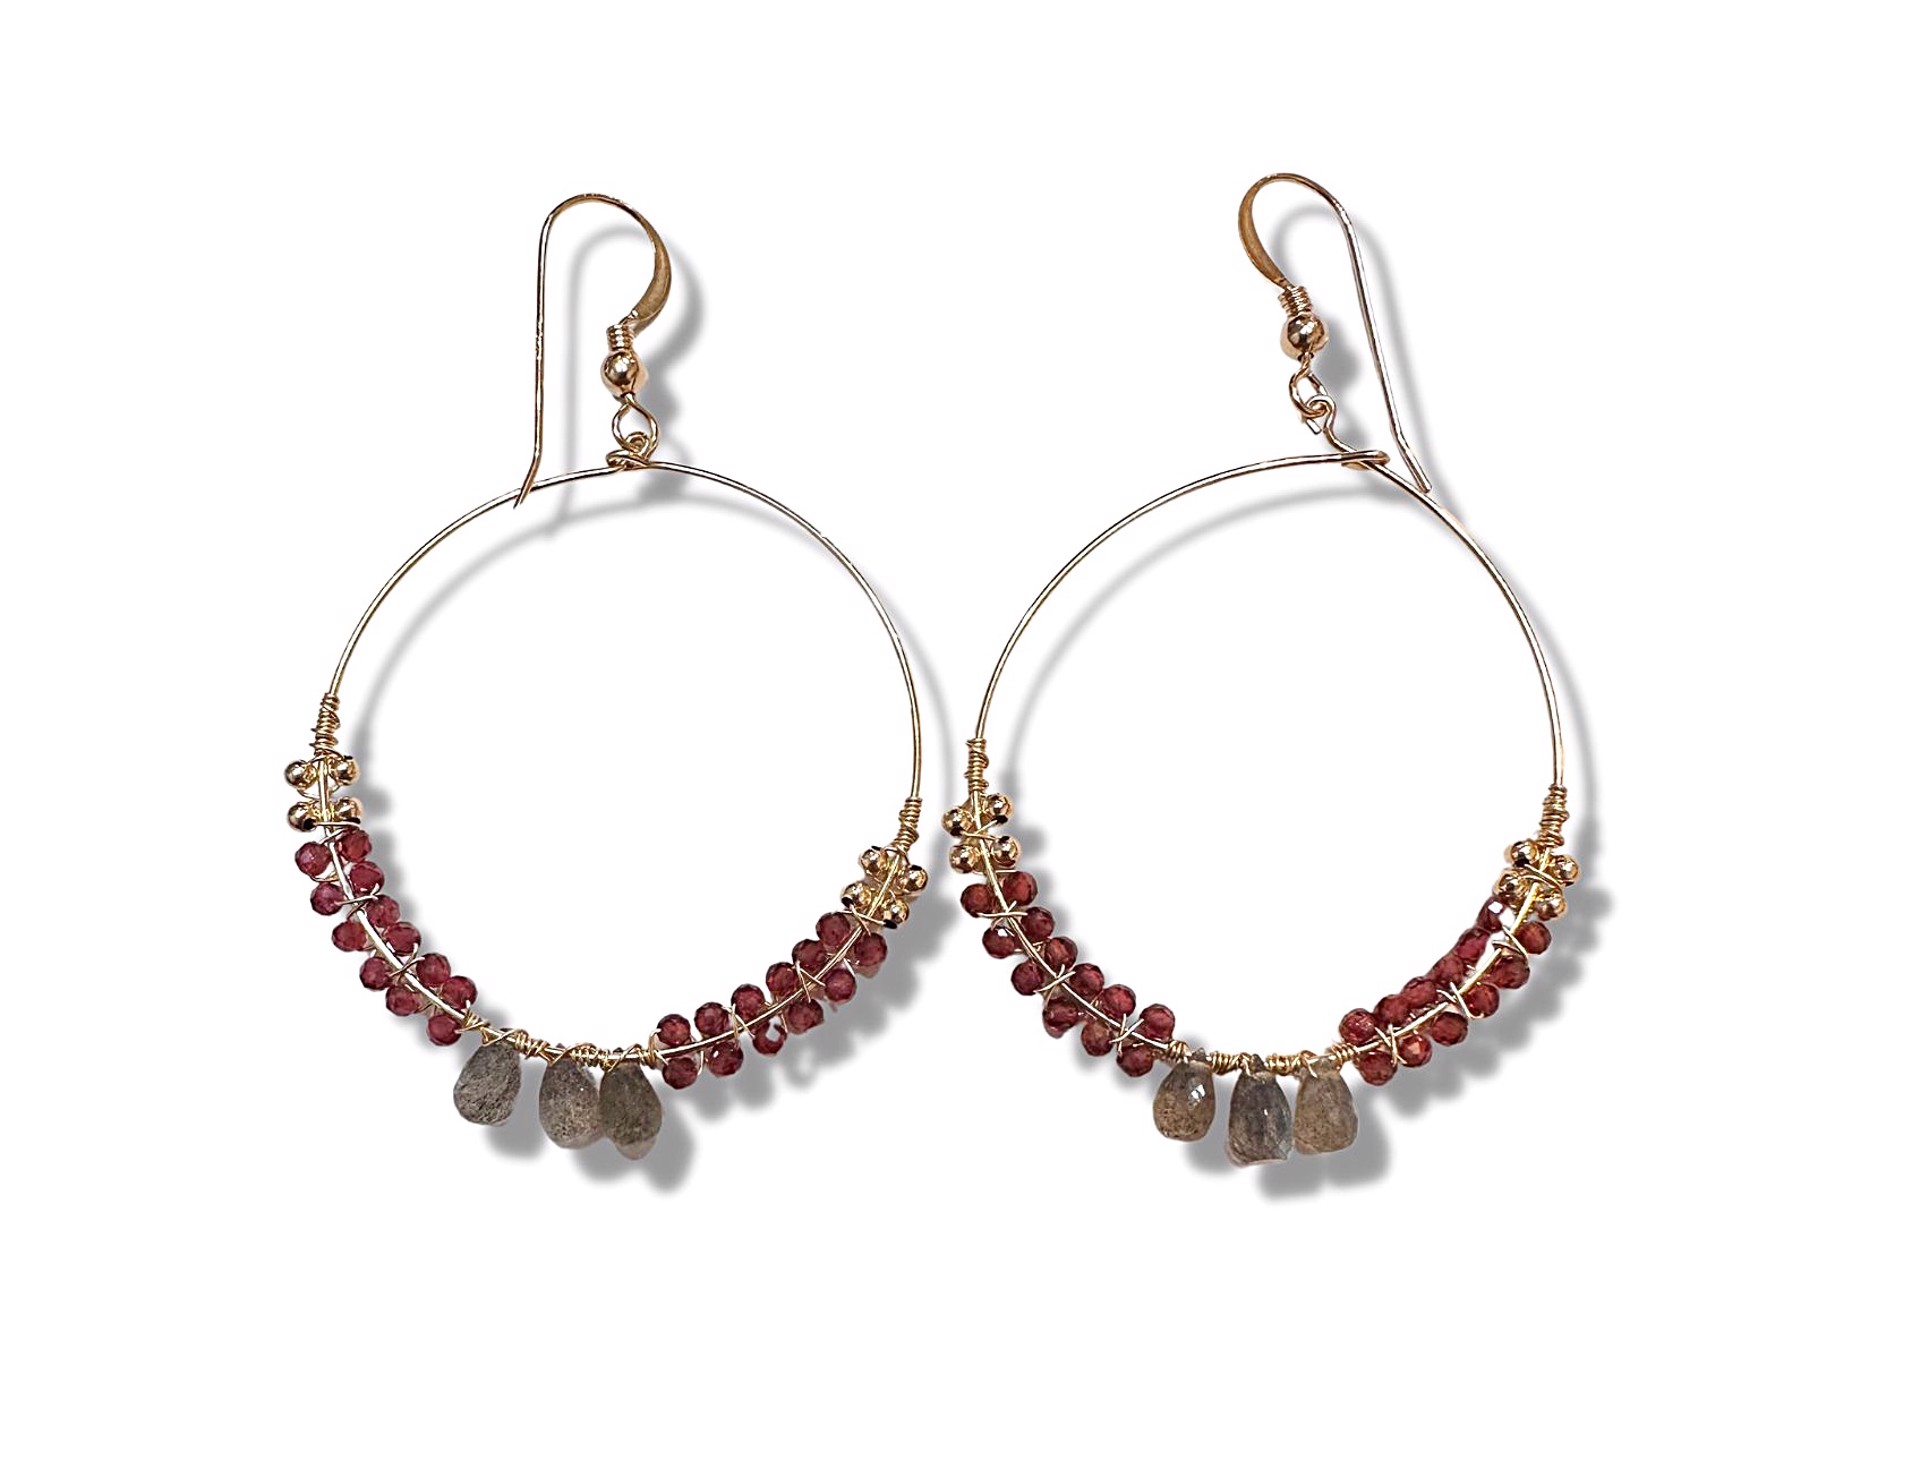 Earrings - Garnet and Labradorite Hoops with 14K Gold Filling by Julia Balestracci